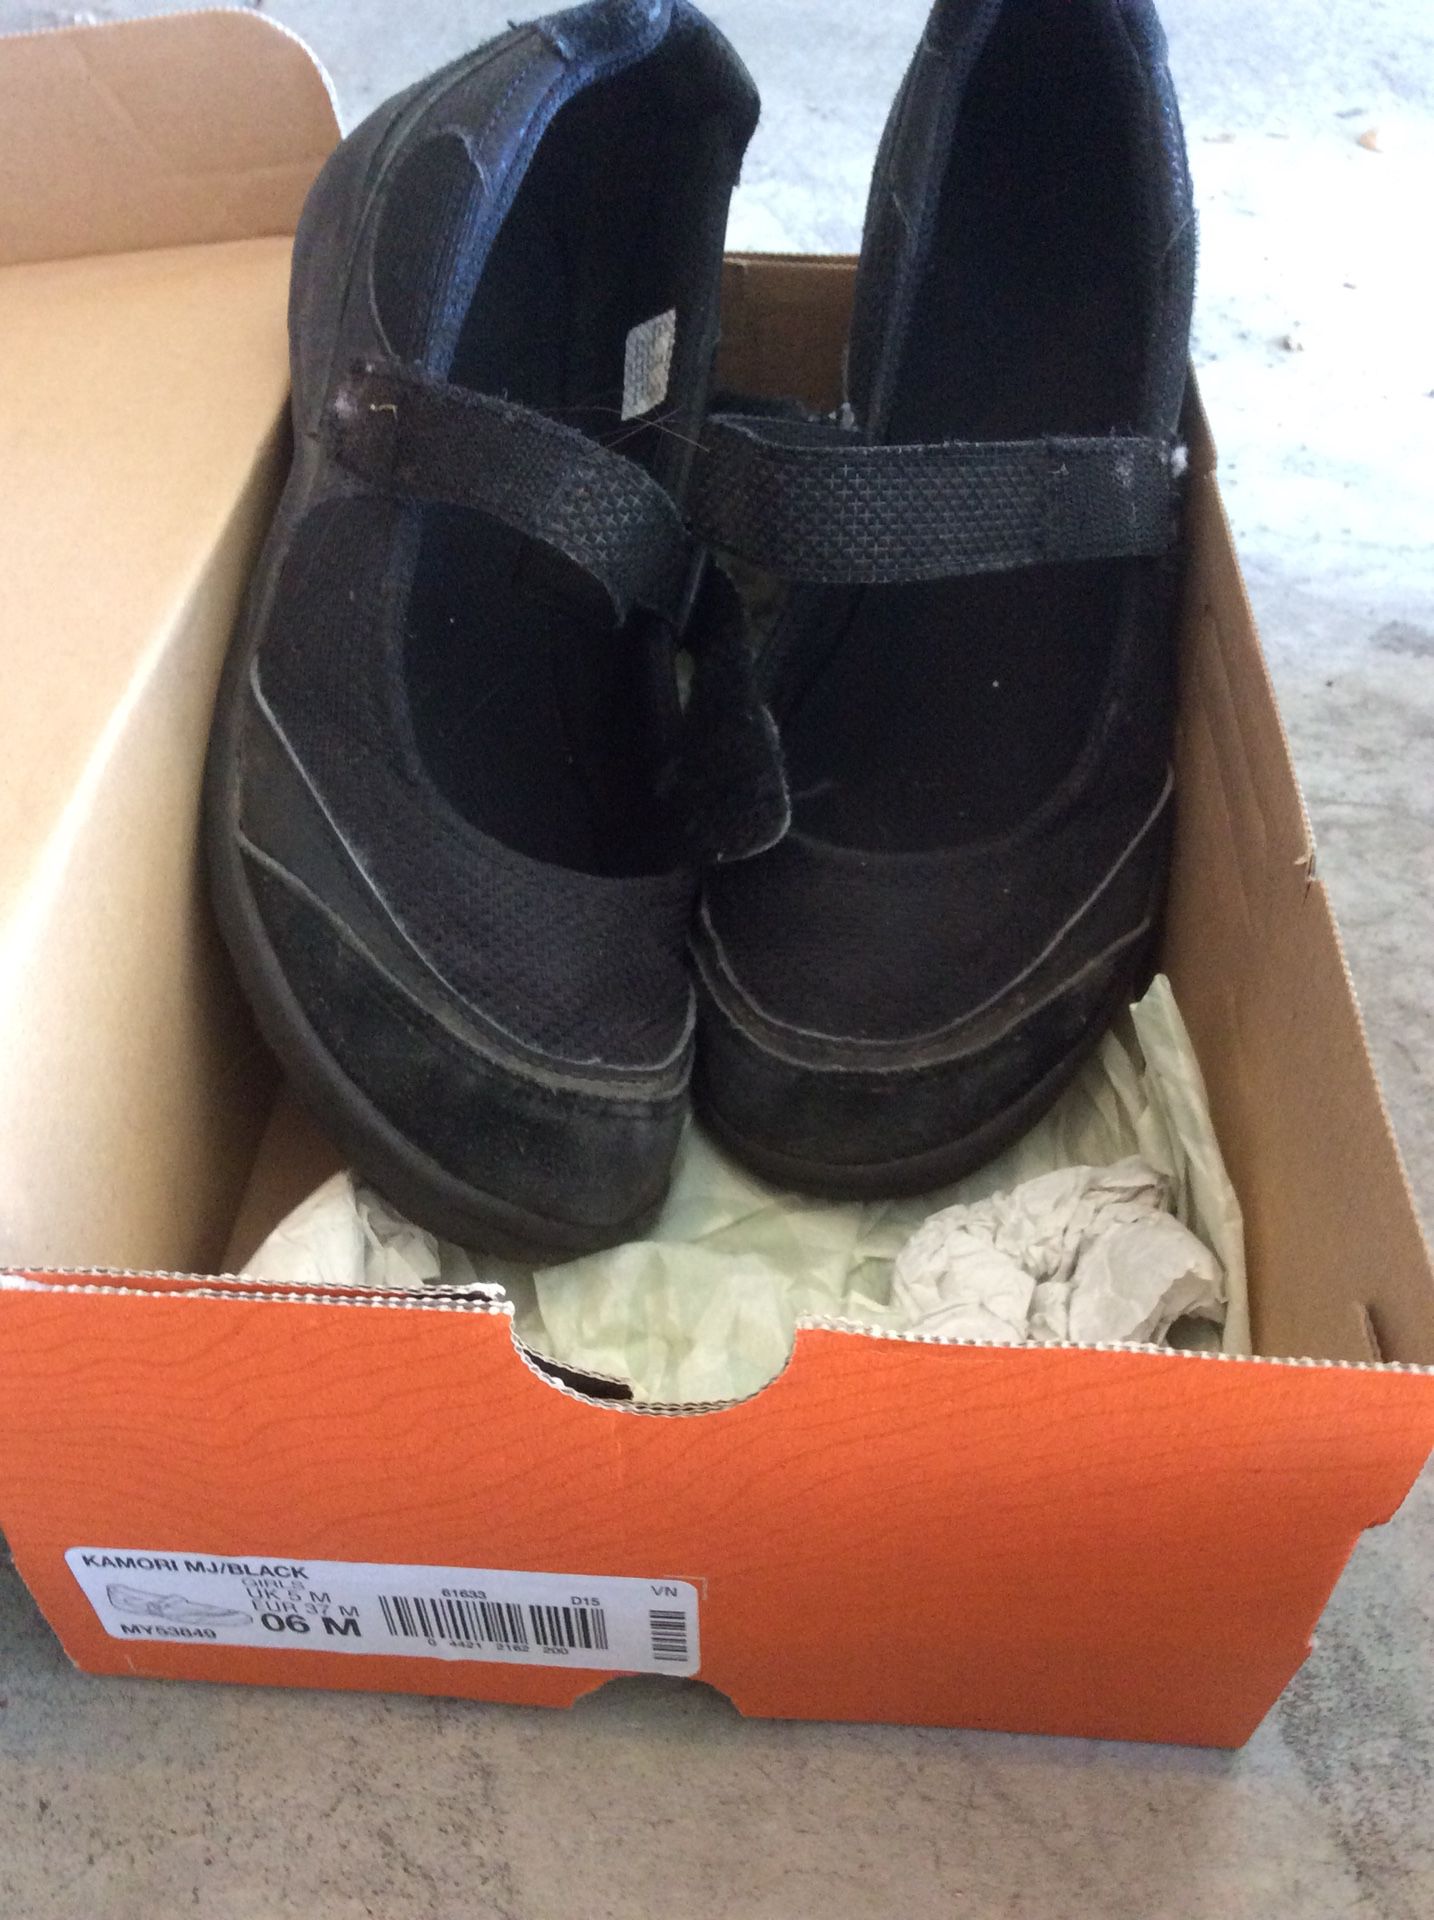 Merrell Kamori Suede Mary Janes Size Youth/Big Kid 6M or Womens 8M for La Mirada, CA - OfferUp